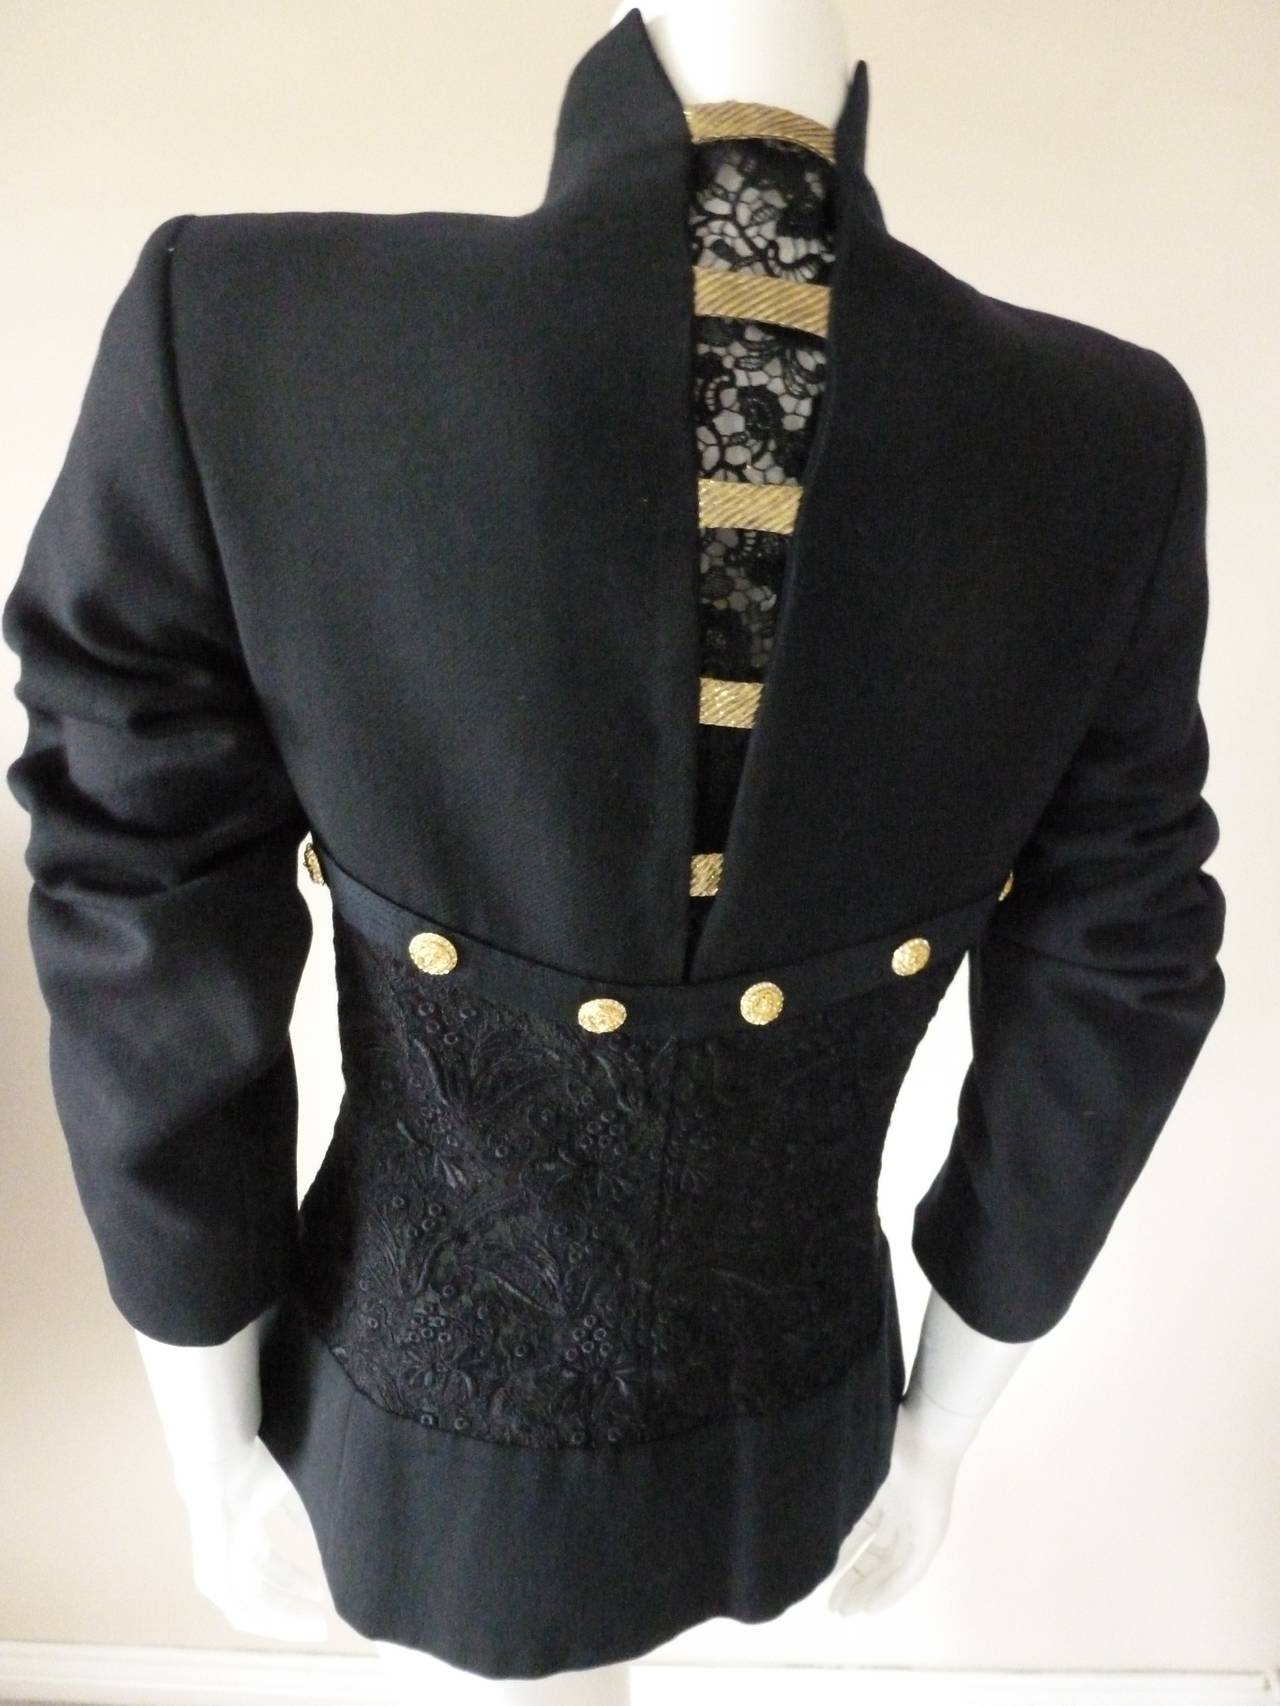 Rare Gianni Versace Couture Studded Medusa Lace Jacket Spring 1992 In Excellent Condition For Sale In W1, GB